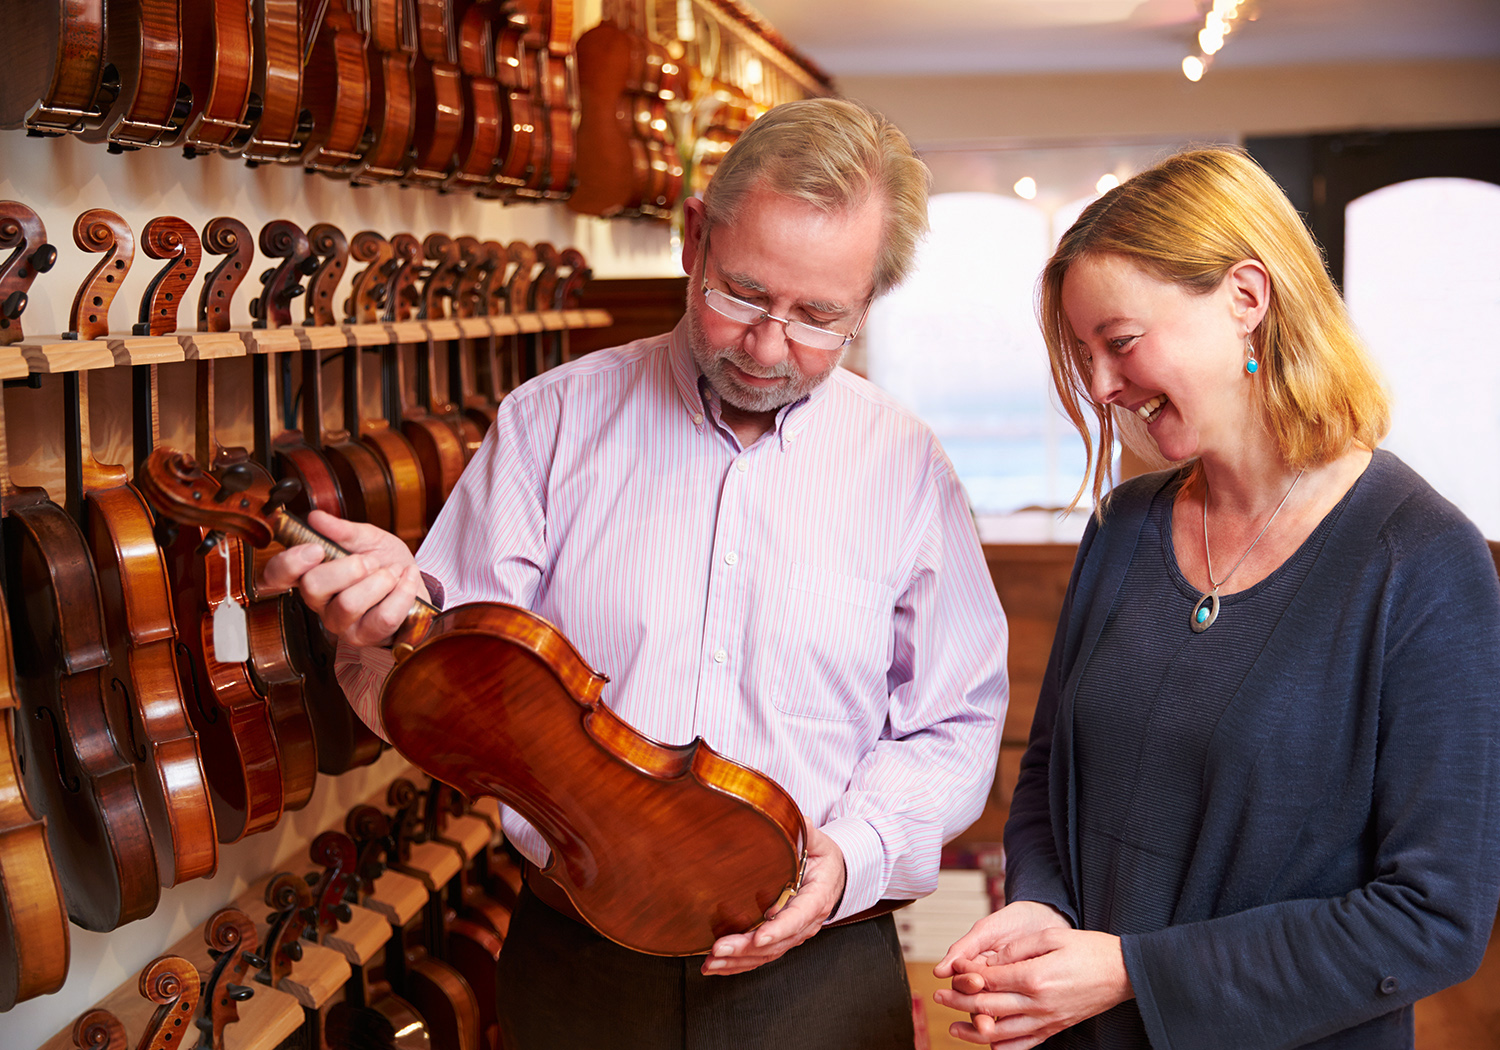 Man and woman in a violin shop holding a violin and smiling